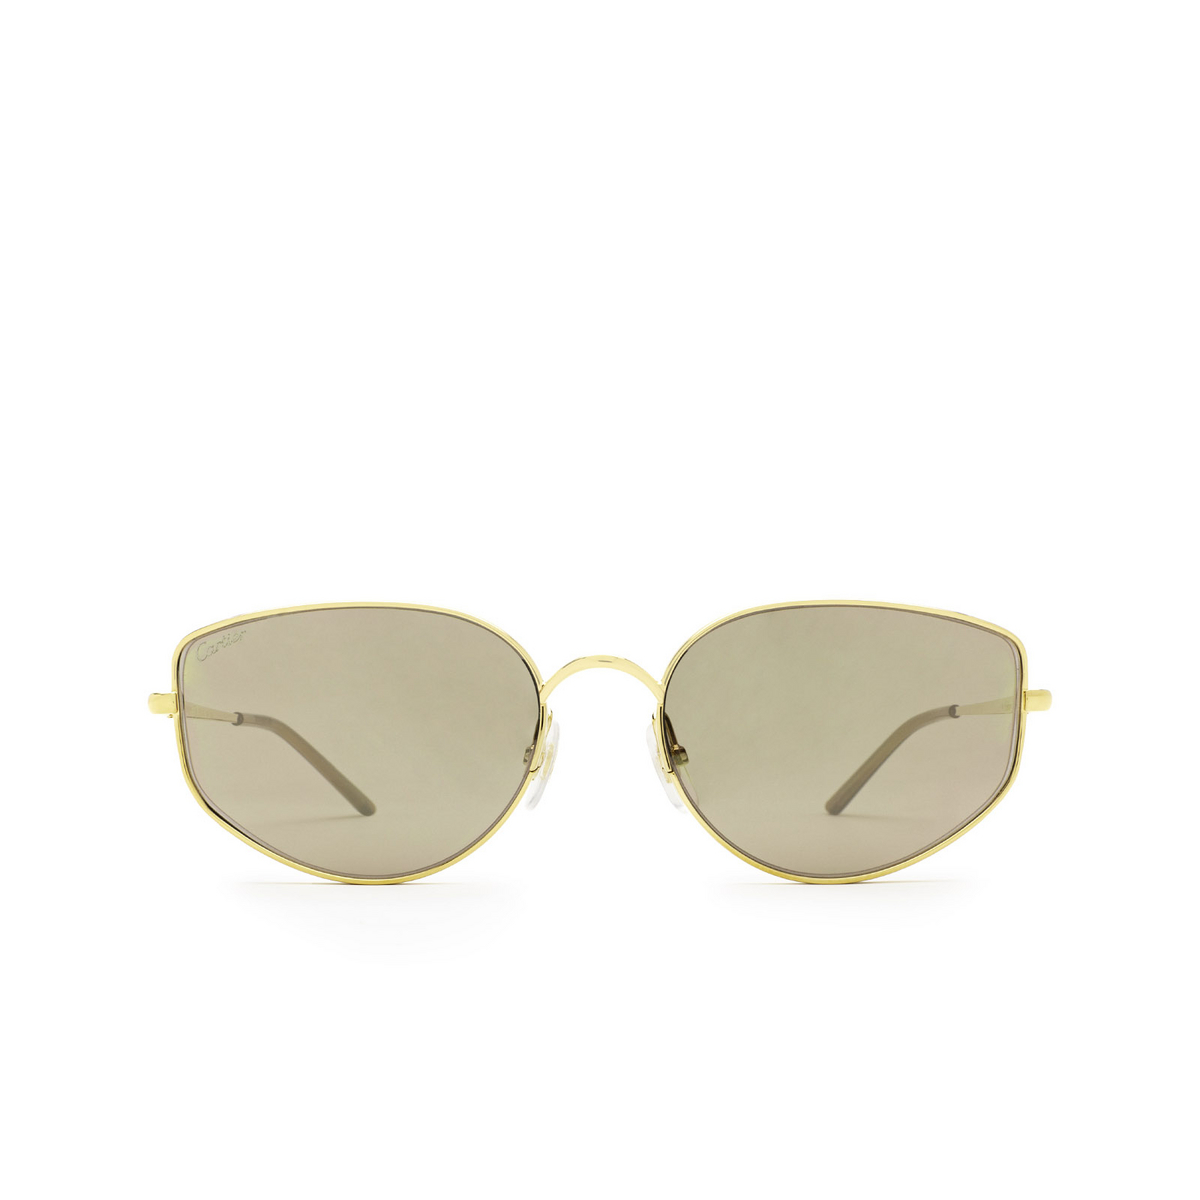 Cartier® Cat-eye Sunglasses: CT0300S color Gold 004 - front view.